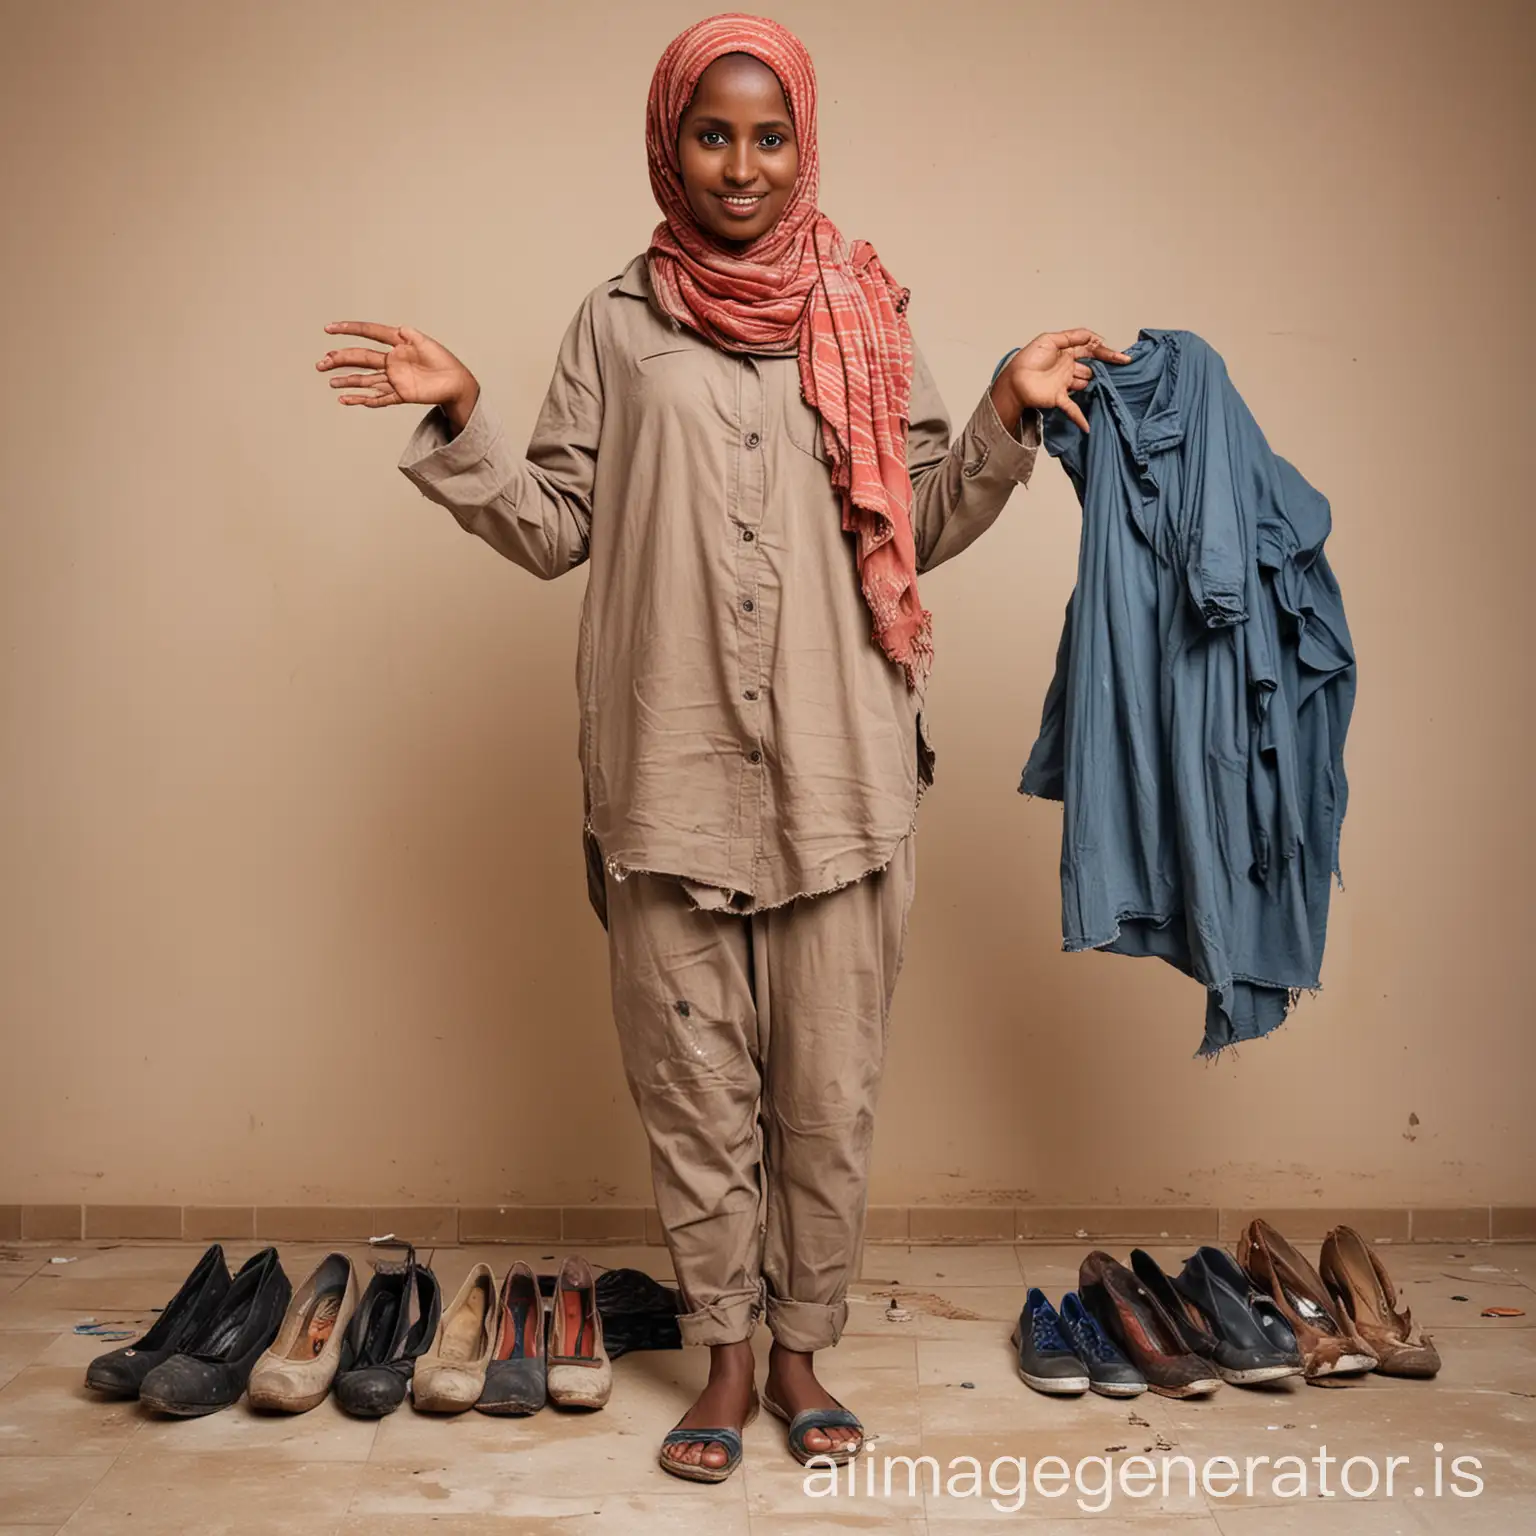 one Somali woman with dirty clothes and shoes, T-pose position